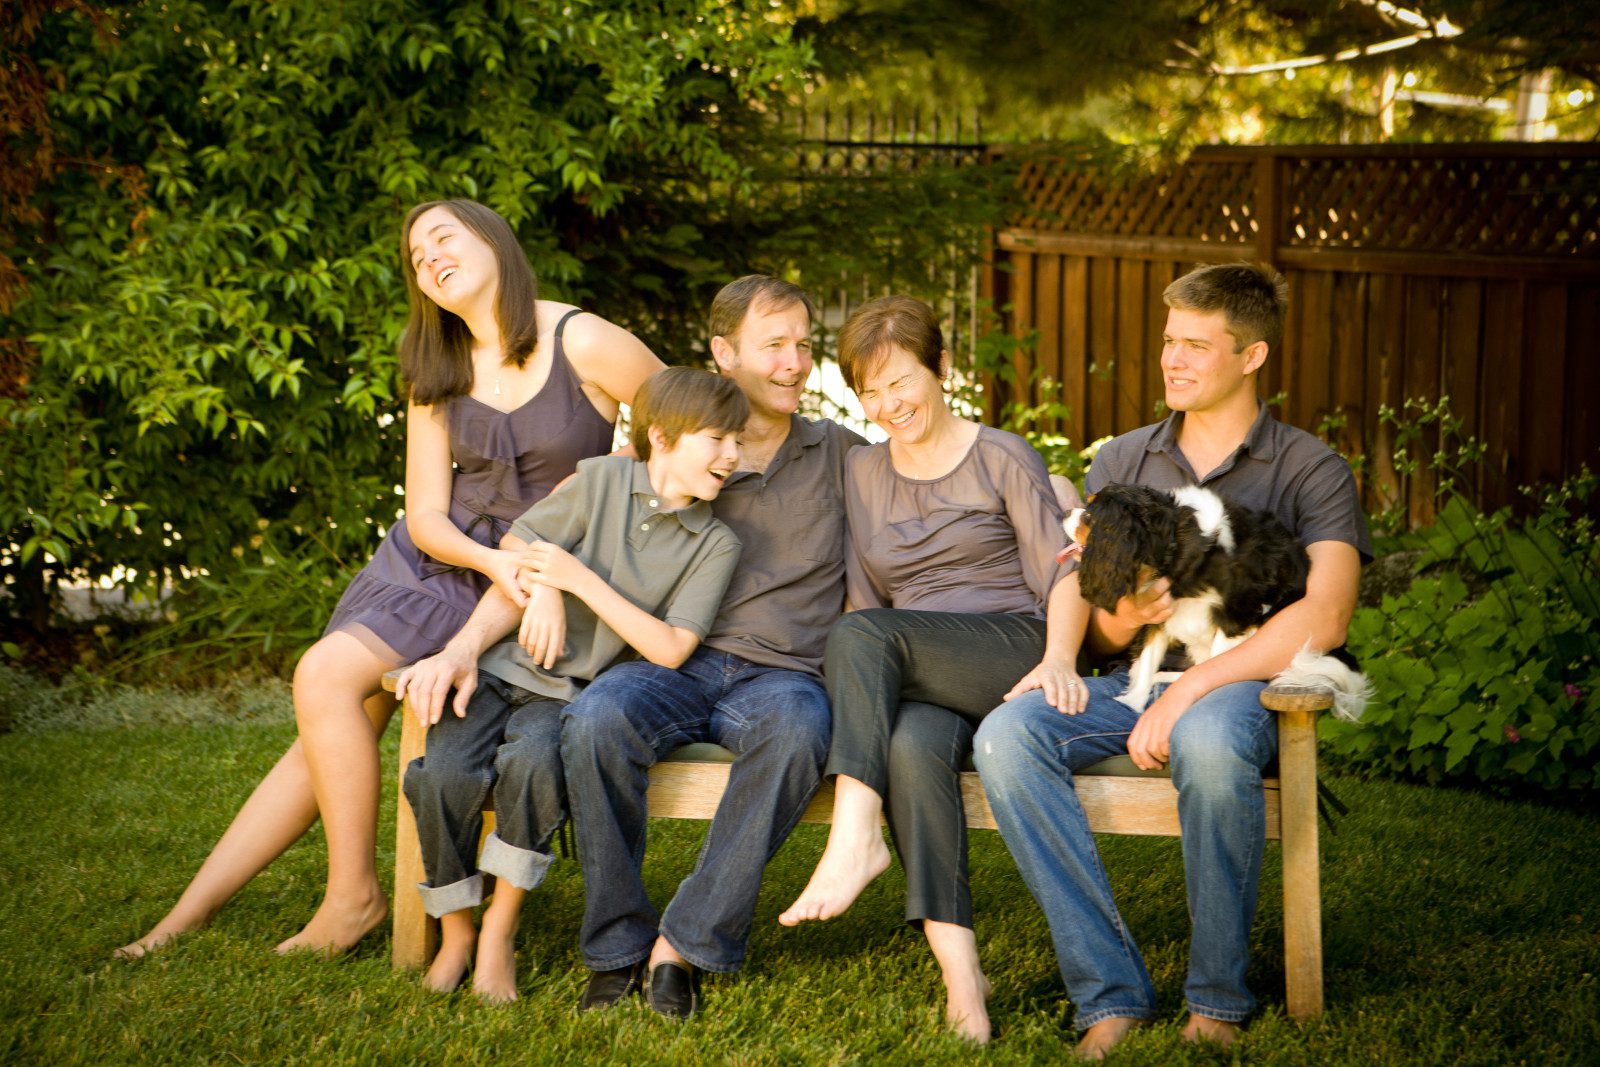 A family sitting on a bench in a garden